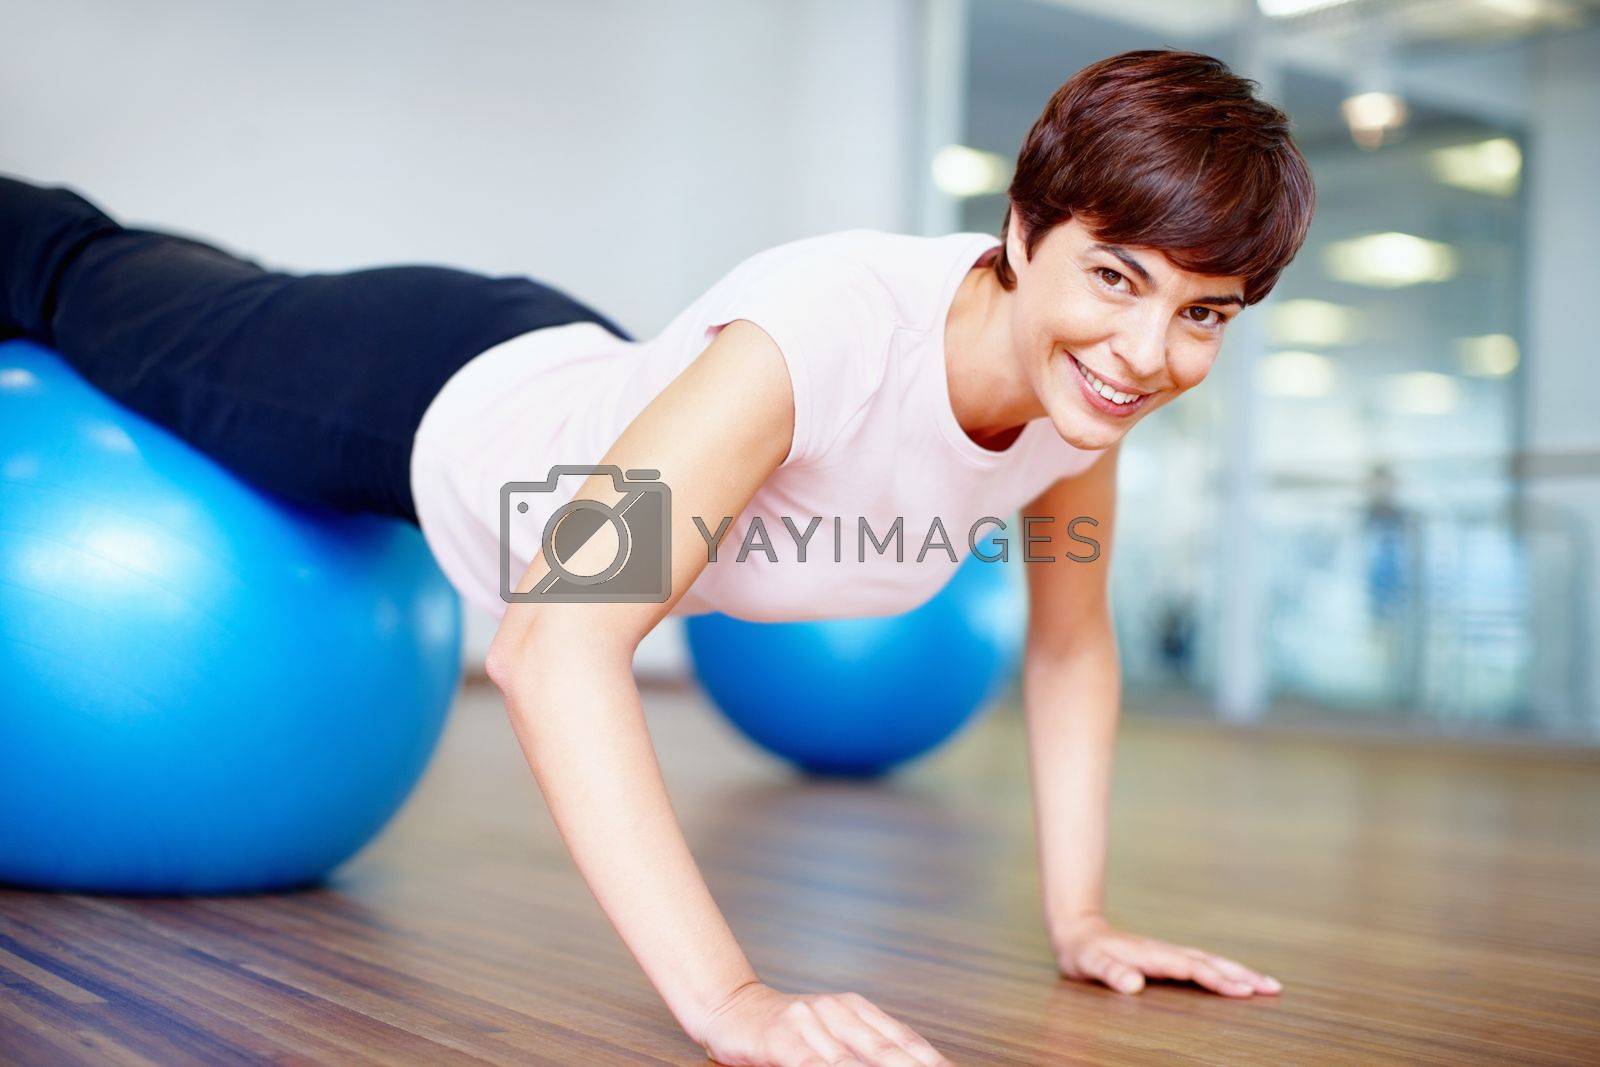 Royalty free image of Woman doing push ups on pilates ball. Portrait of woman doing push ups on pilates ball and smiling. by YuriArcurs